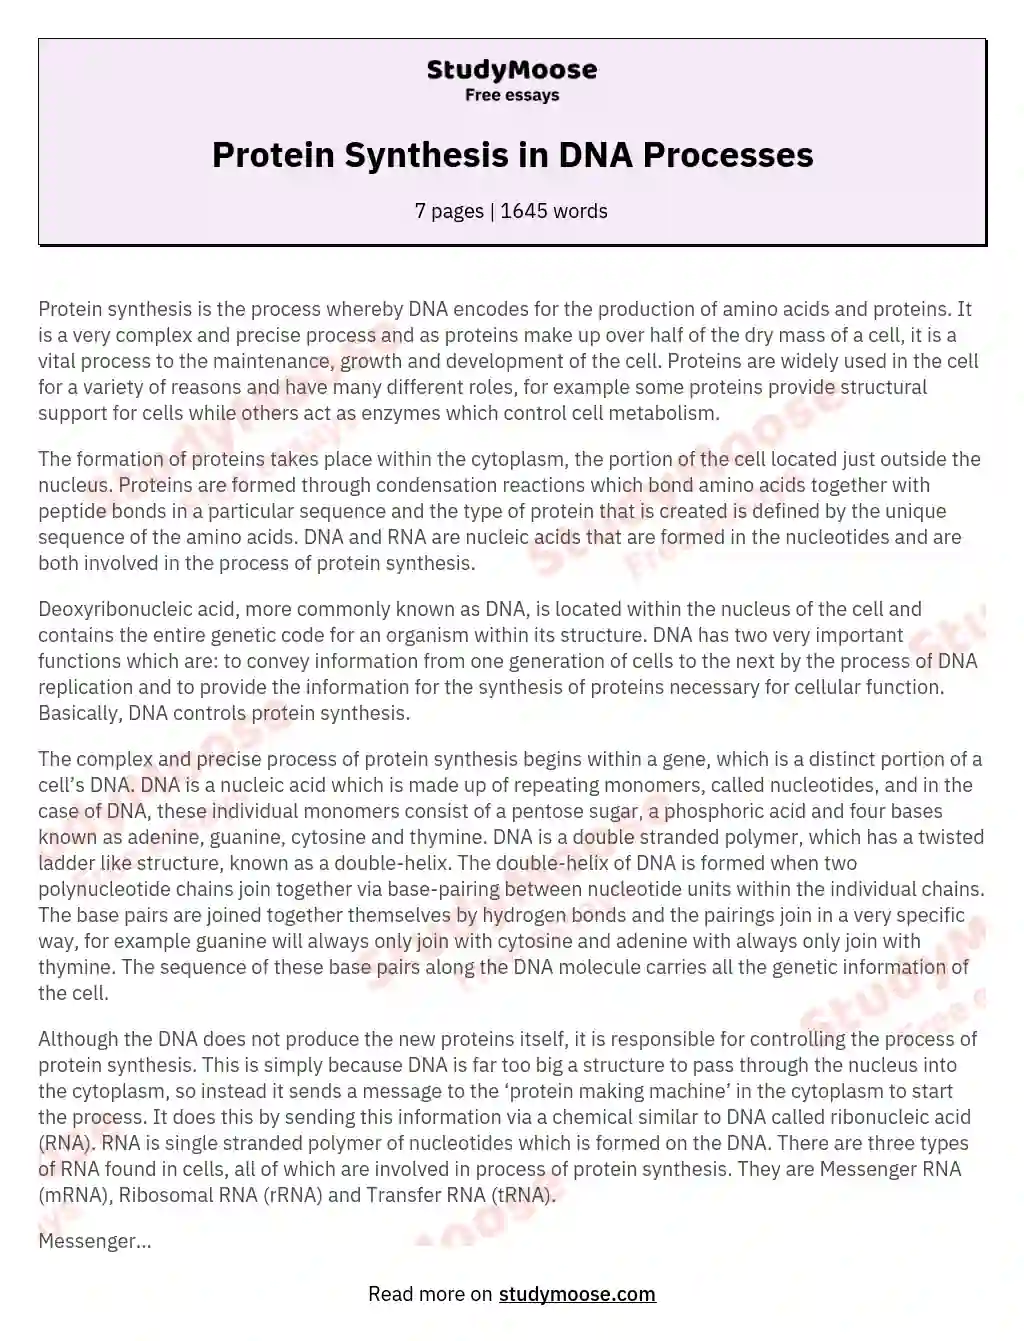 Protein Synthesis in DNA Processes essay